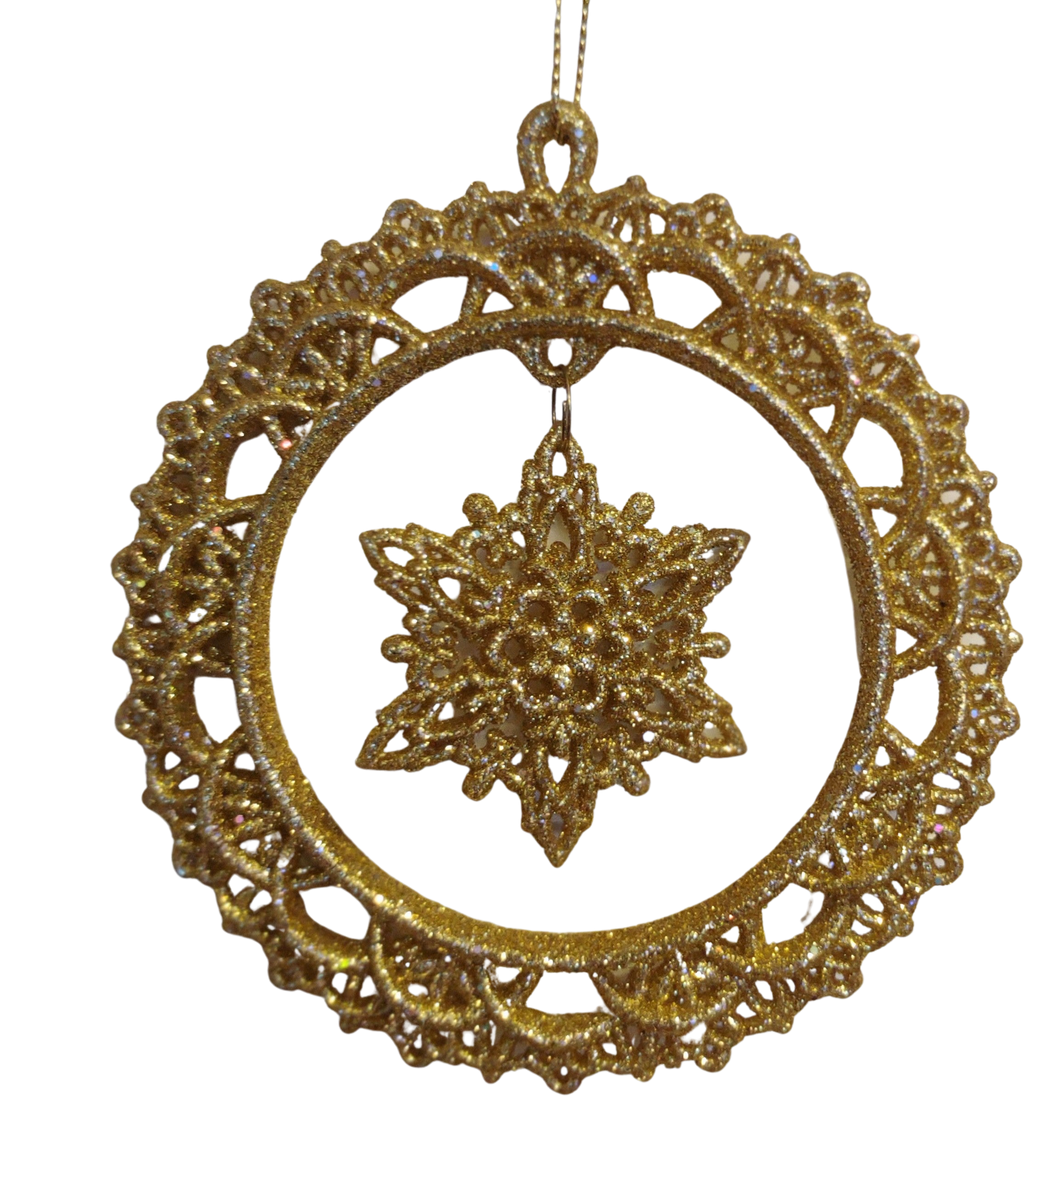 Acrylic Gold Ornament with Gold Snowflake in Center 4